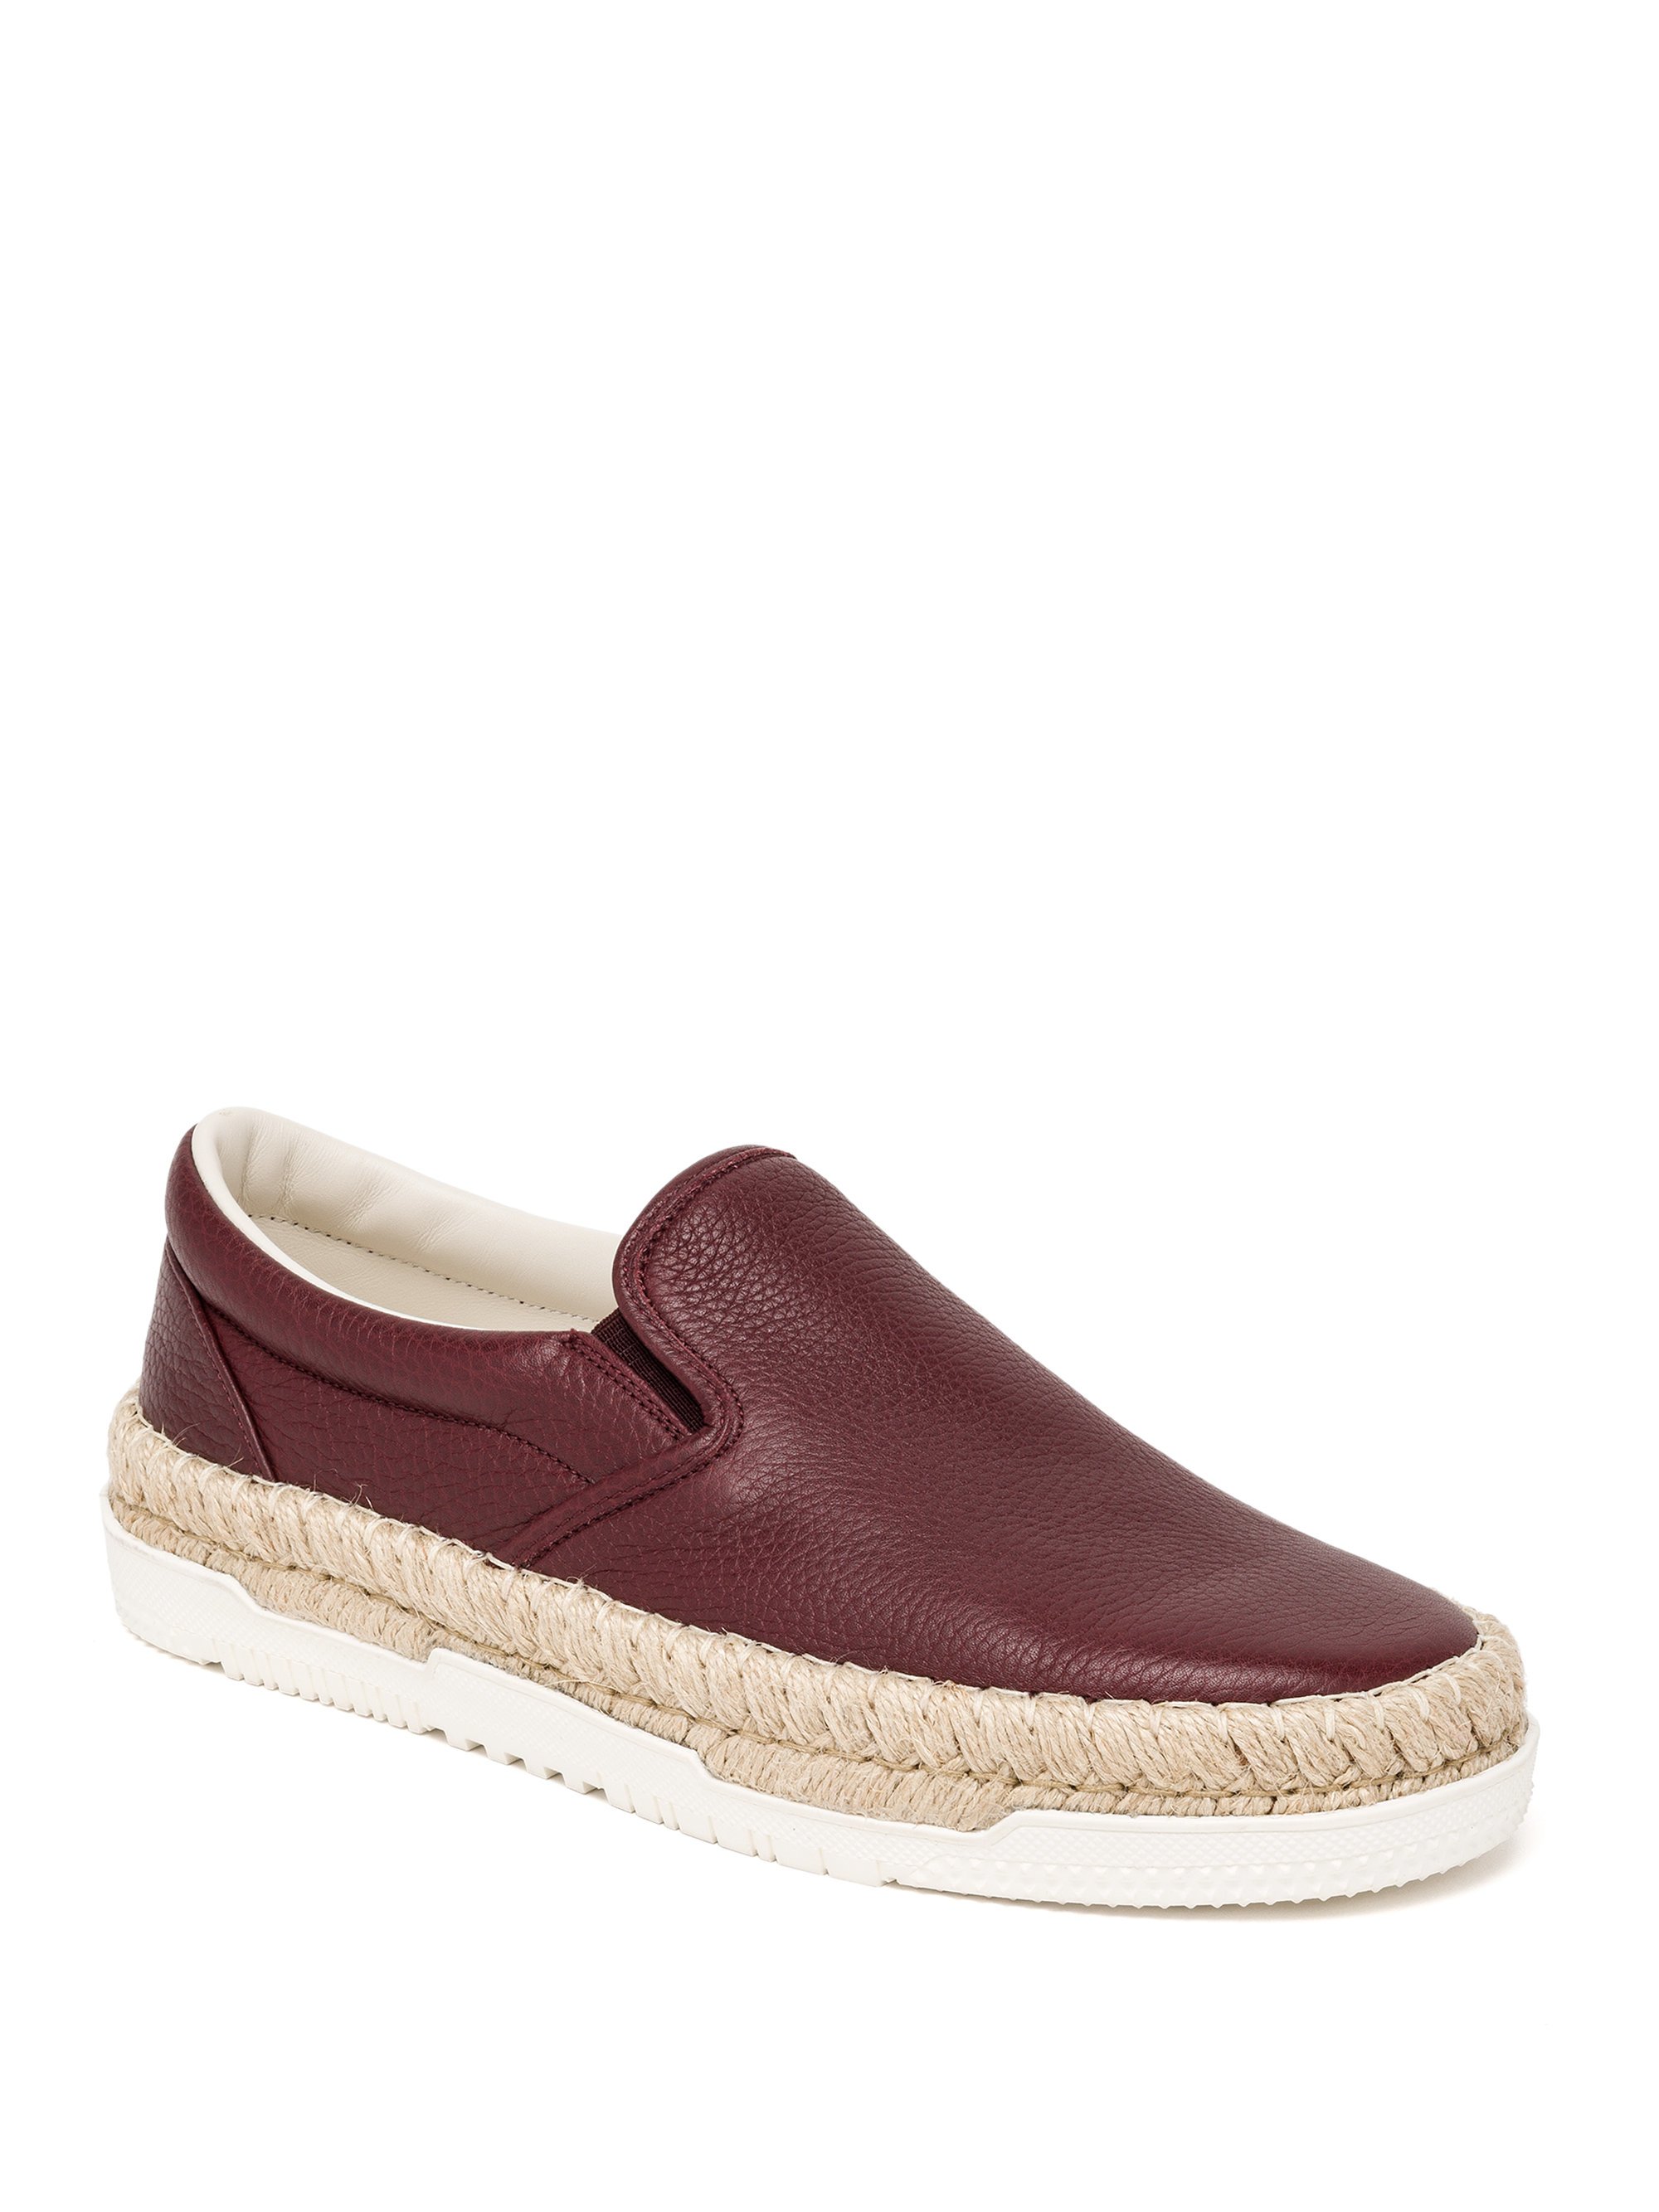 Lyst - Valentino Leather Slip-on Espadrille Sneakers in Purple for Men